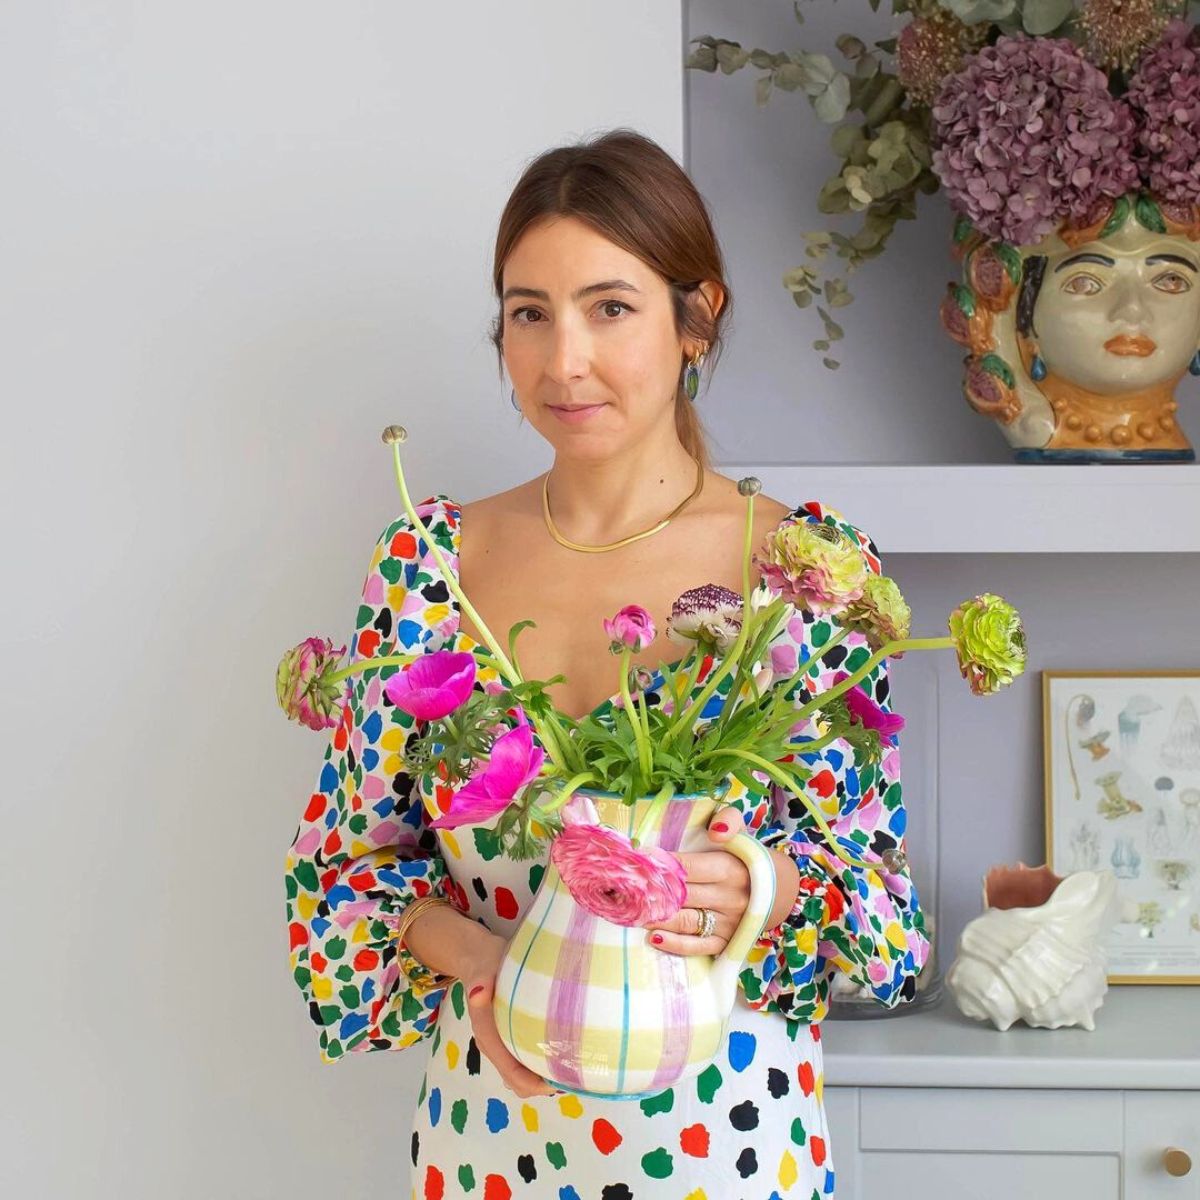 Lea Zana with flowers and her vase